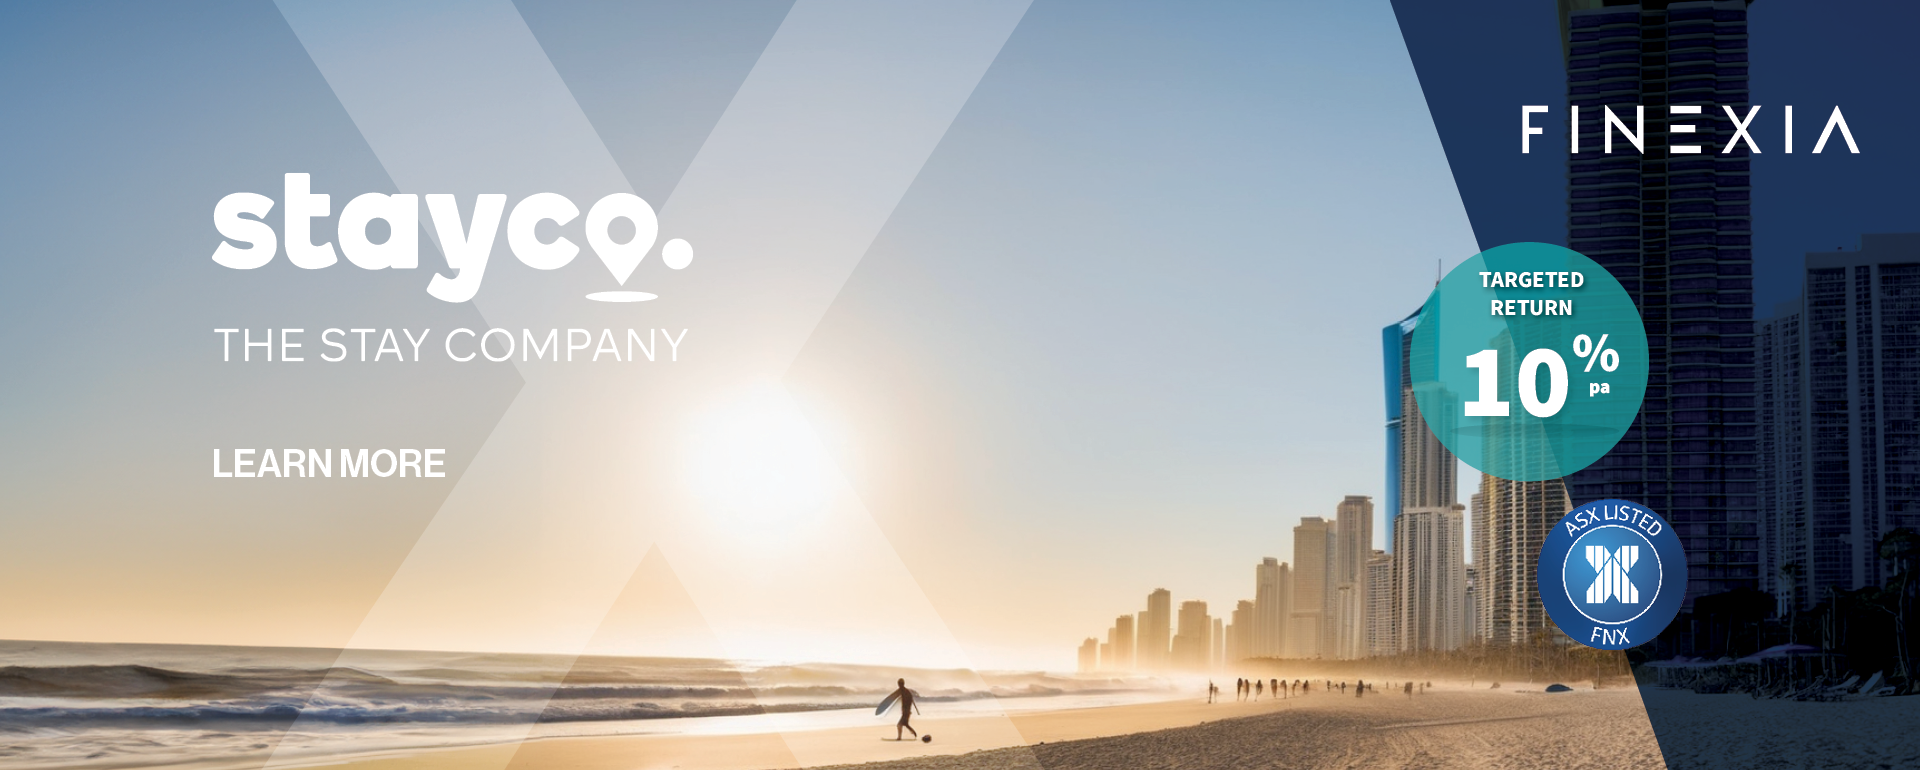 Stayco is a managed fund specializing in operating and managing holiday and resort accommodation complexes in Southeast Queensland, Australia. It offers investors the opportunity to participate in the growing tourism sector